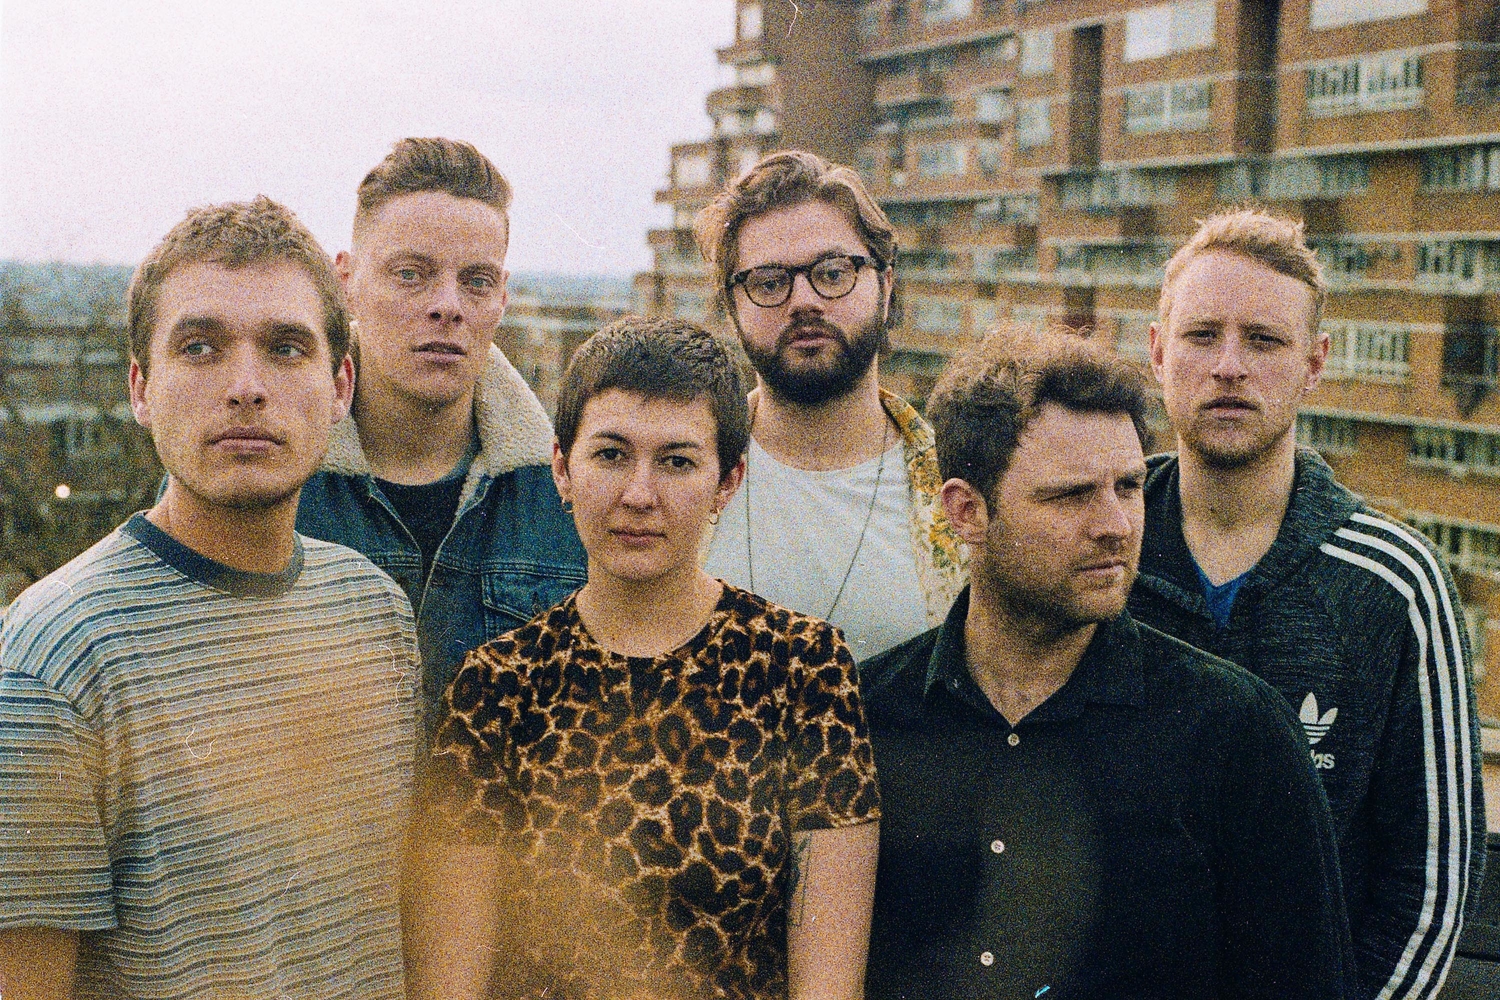 ALASKALASKA look forward to Liverpool Sound City: “Keep your ears peeled for some new music!”